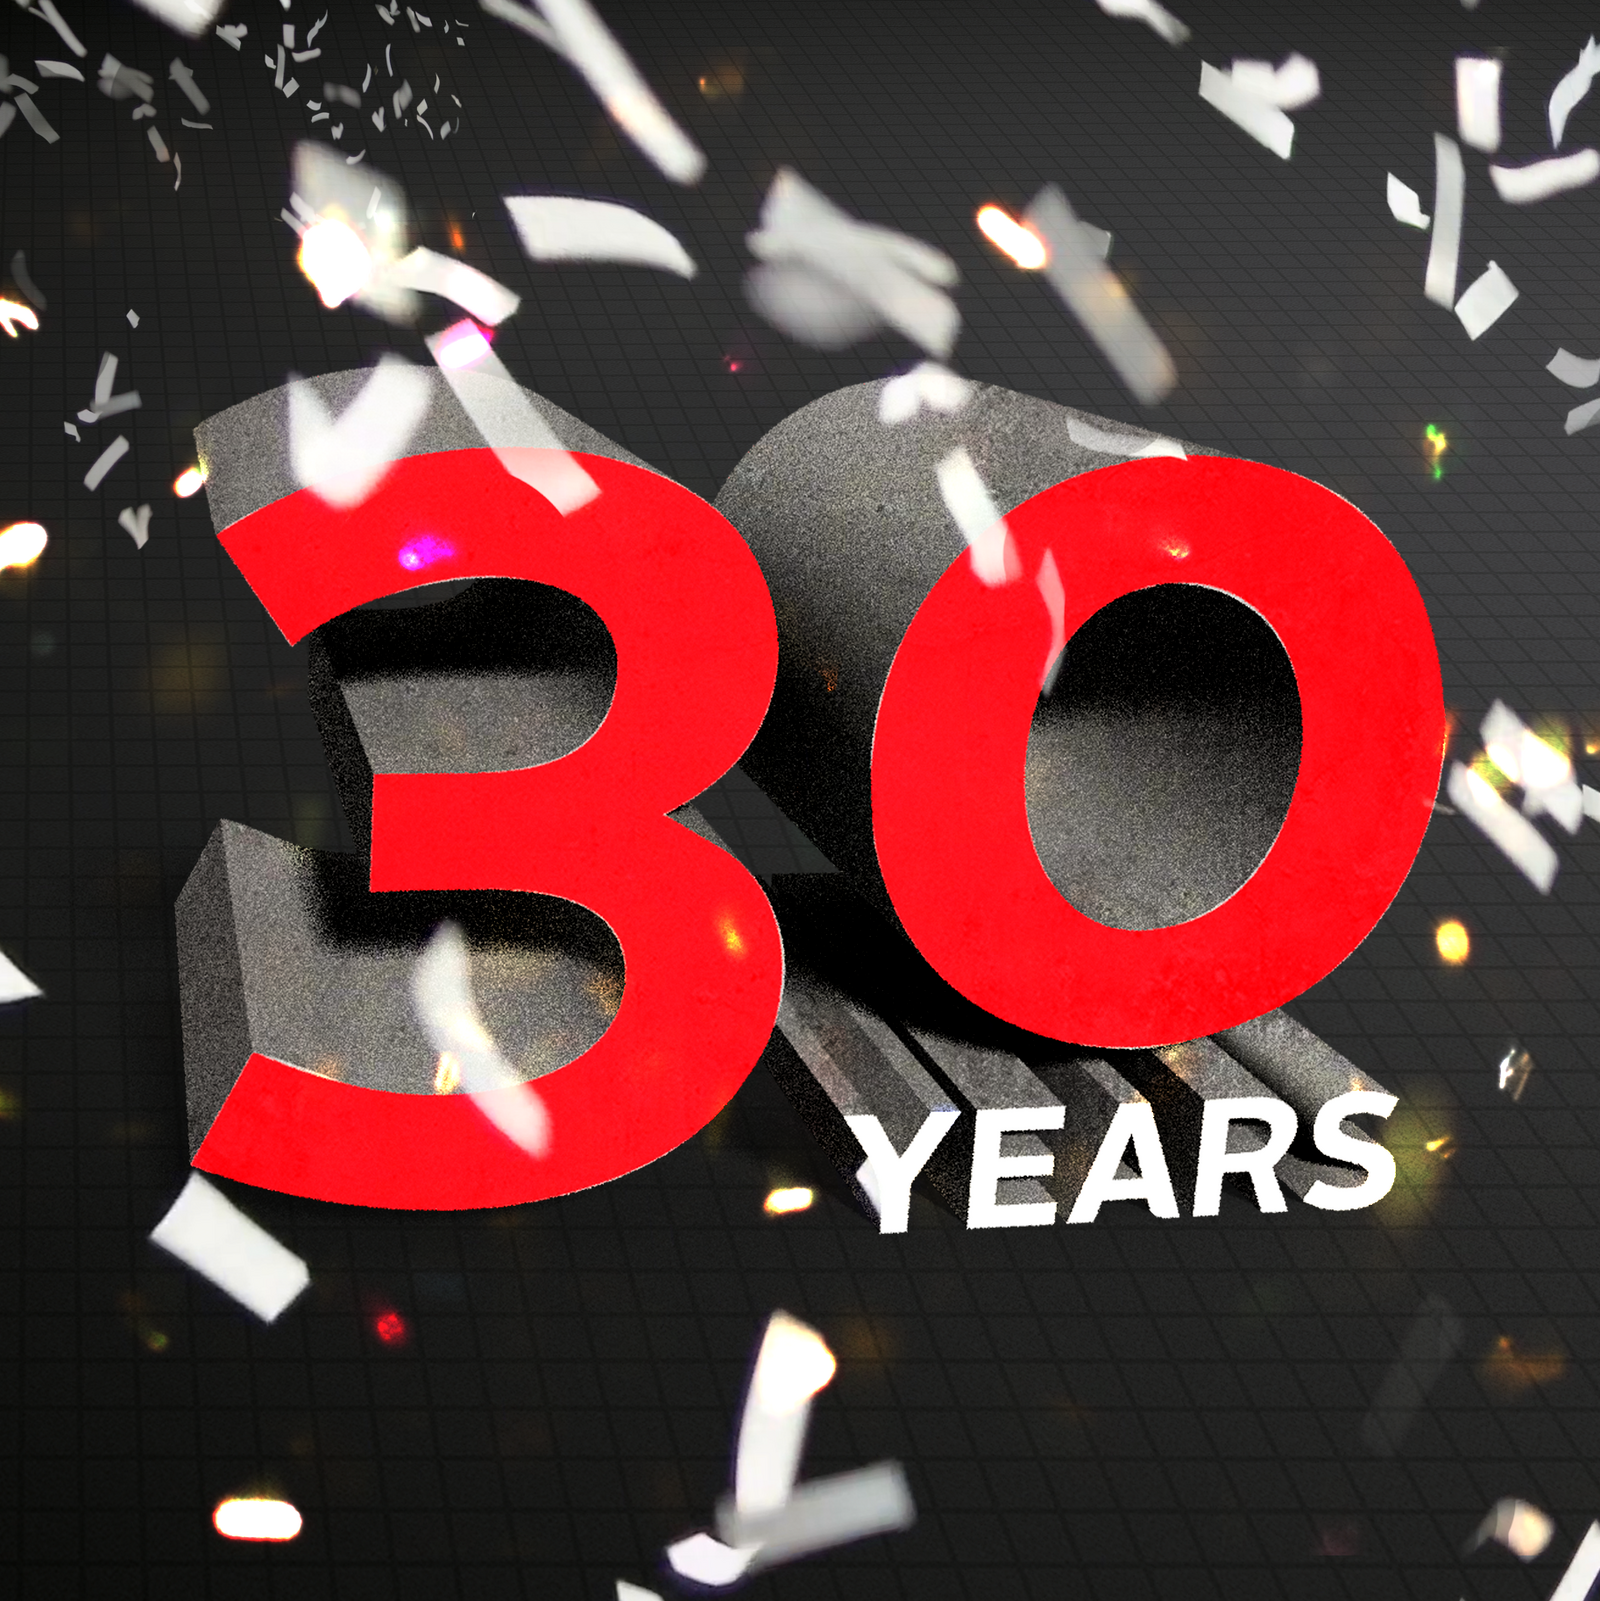 Allied Vision's 30th company anniversary